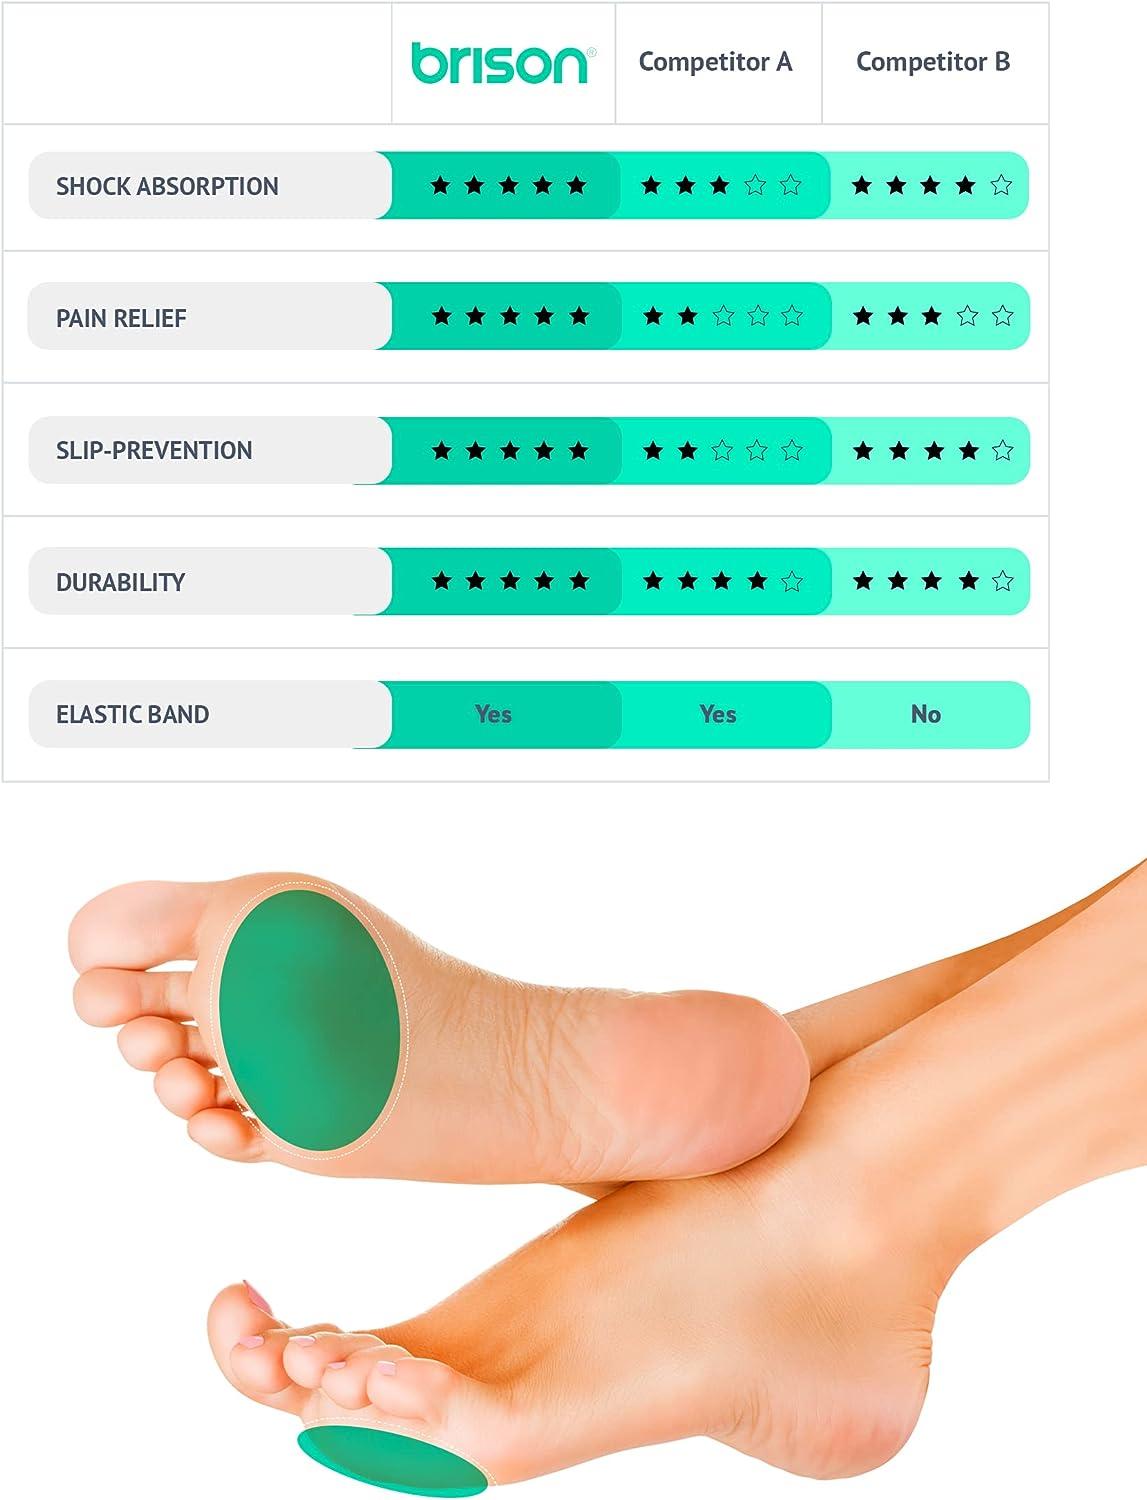 Buy Metatarsal Pads - Gel Sleeves Forefoot Cushion Pads - Fabric Soft Foot  Care Ball of Foot Cushions for Bunion Forefoot Mortons Neuroma Blisters  Callus Supports Metatarsalgia Pain Relief - Men Women